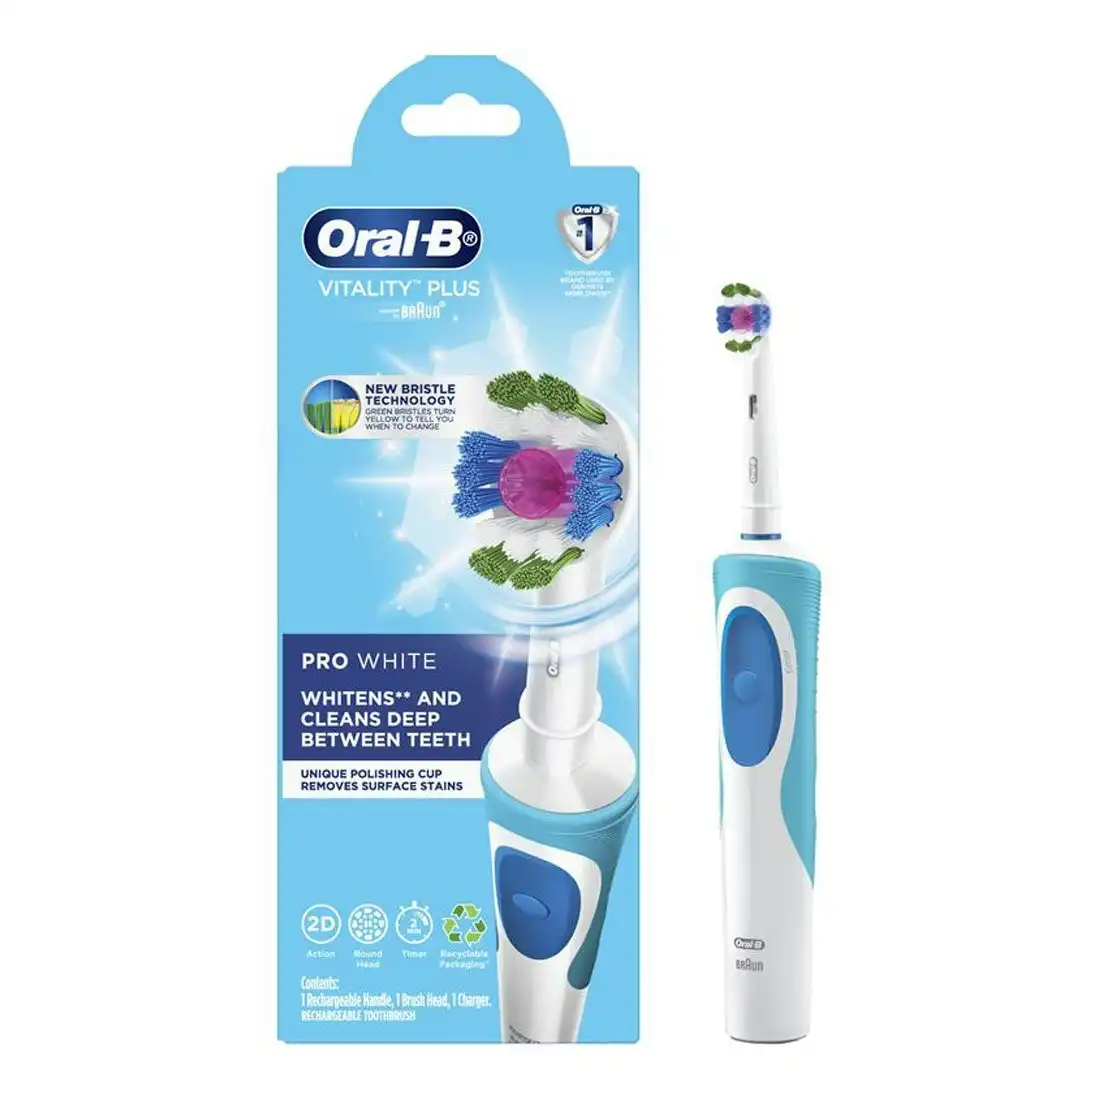 Oral-B Vitality Plus Pro Electric Toothbrush - White